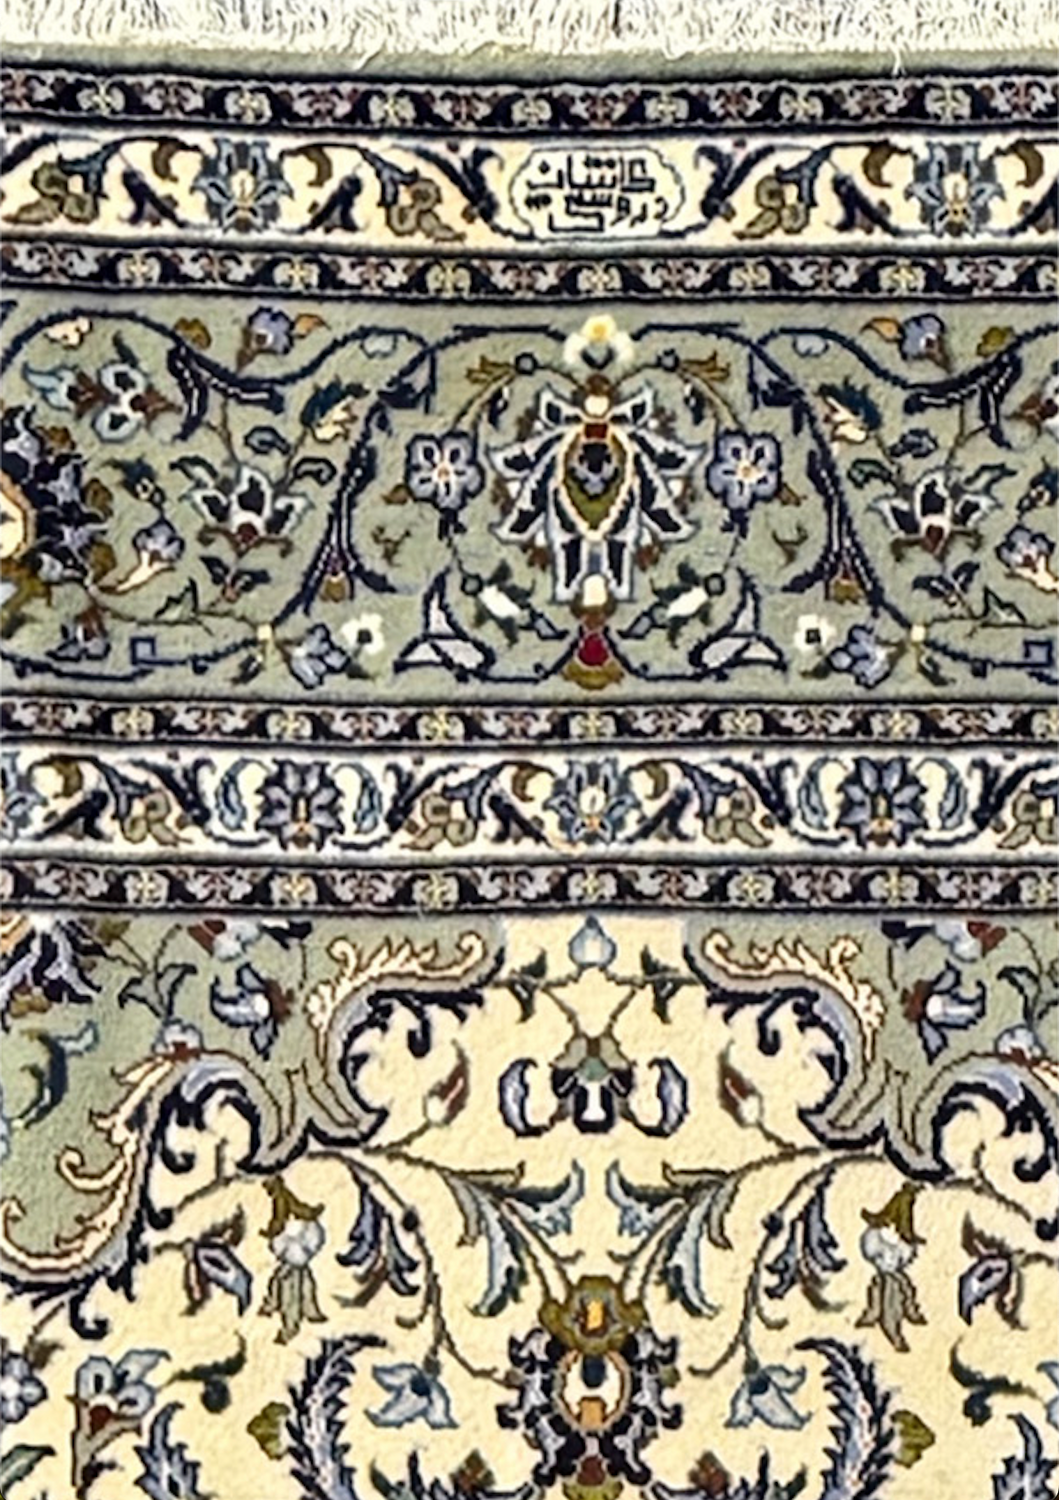 Zoomed-in view of the Persian Kashan rug showing the fine details of the weaver's signature within the ornate border